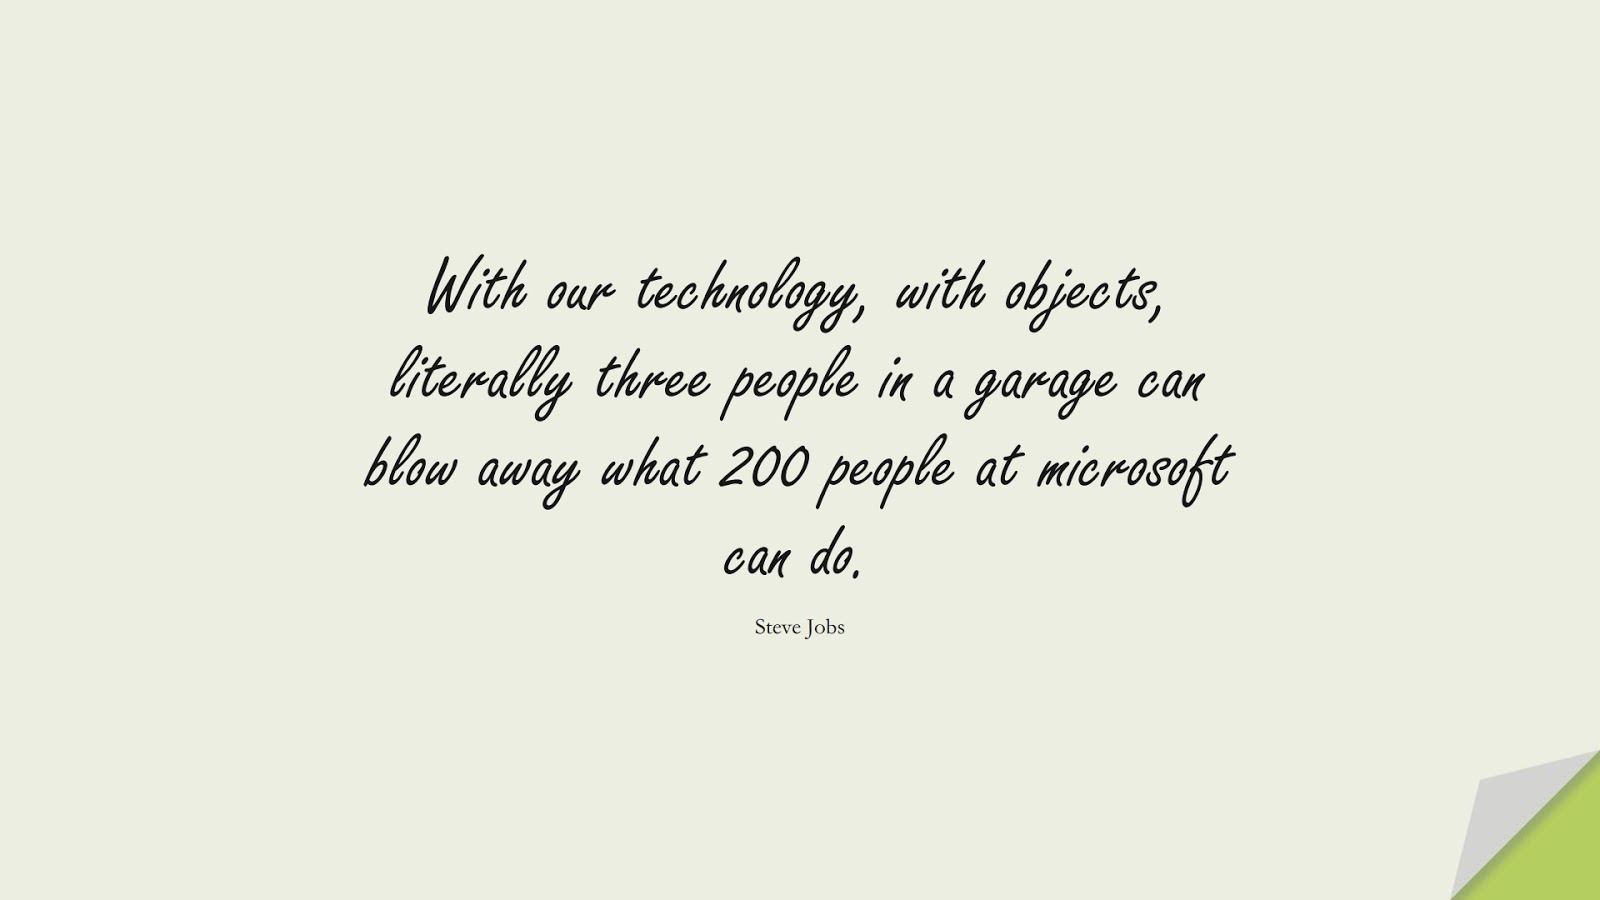 With our technology, with objects, literally three people in a garage can blow away what 200 people at microsoft can do. (Steve Jobs);  #SteveJobsQuotes